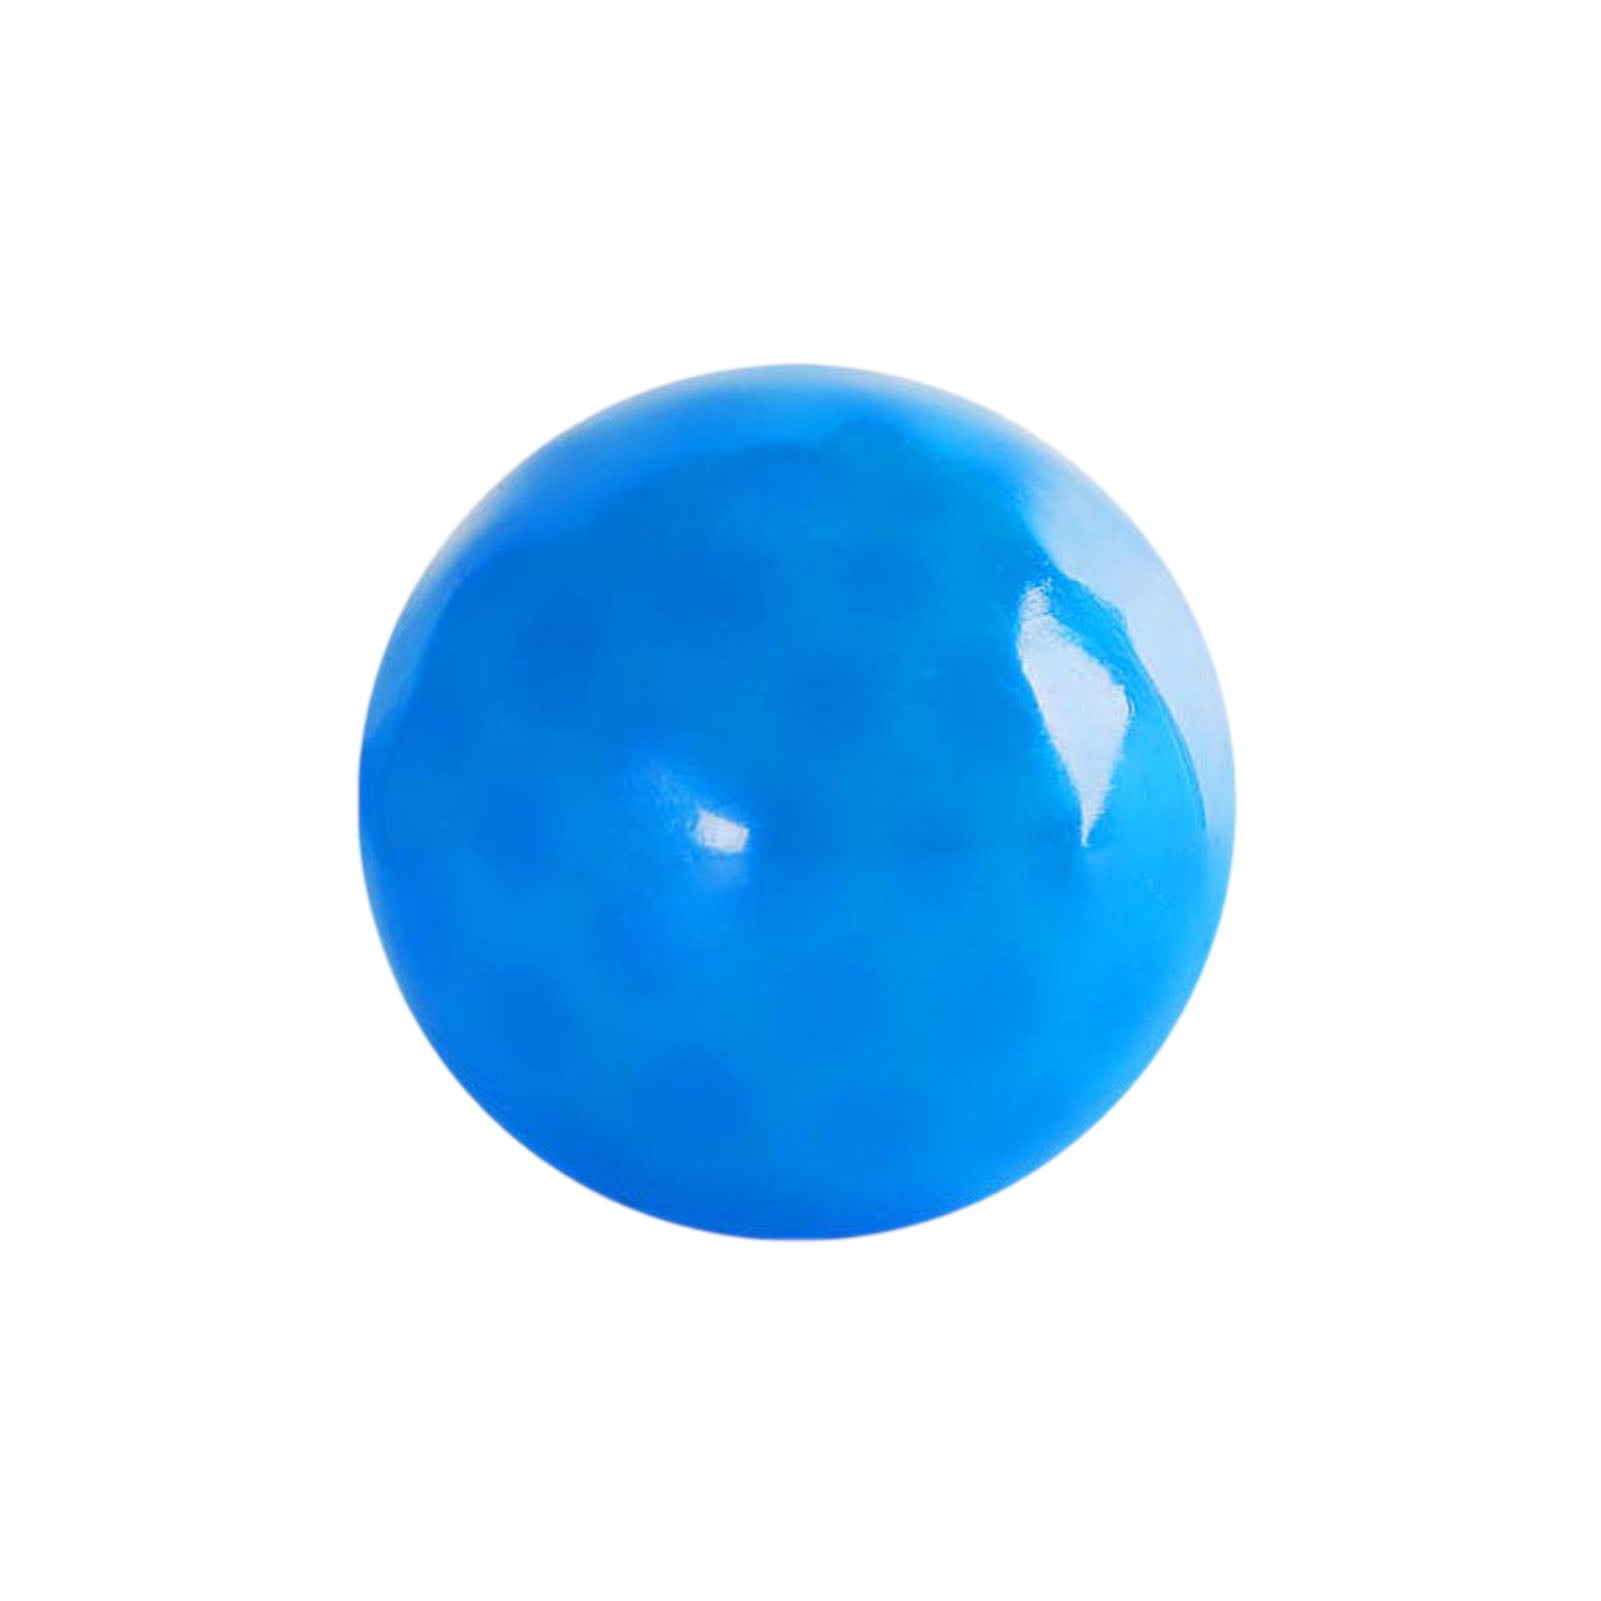 Details about   Sticky Balls Balls Ceiling Stress Relief Globbles Stress Kid Toy Elasticity 